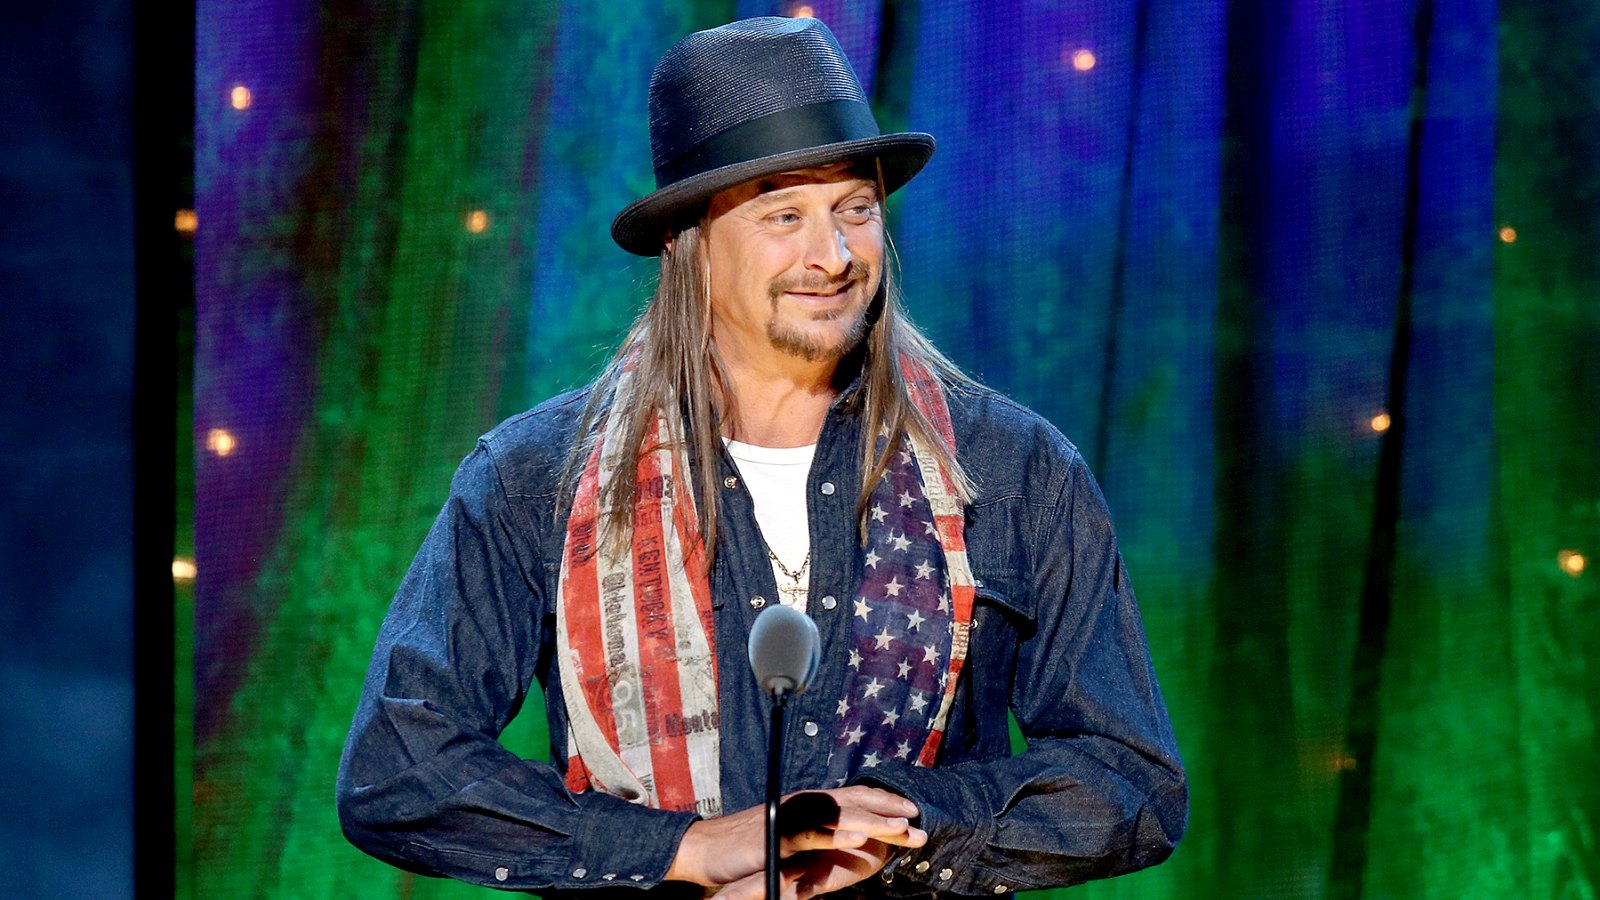 Kid Rock inducts Cheap Trick at the 31st Annual Rock And Roll Hall Of Fame Induction Ceremony at Barclays Center on April 8, 2016 in New York City.